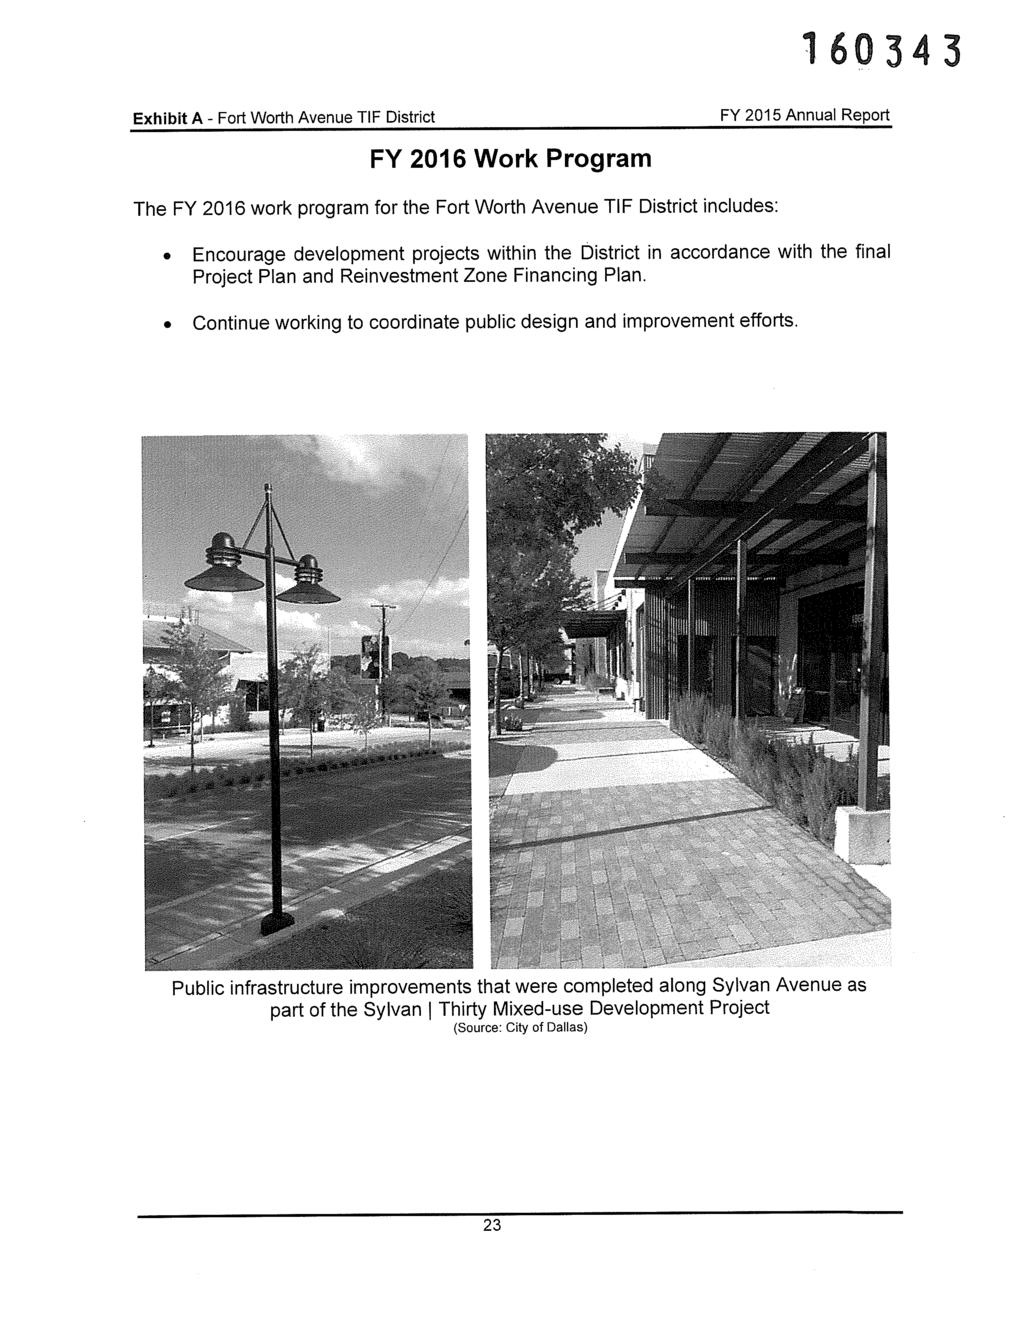 Fort Exhibit A - Worth Avenue TIE District FY 2016 Work Program The FY 2016 work program for the Fort Worth Avenue TIF District includes: Encourage development projects within the District in